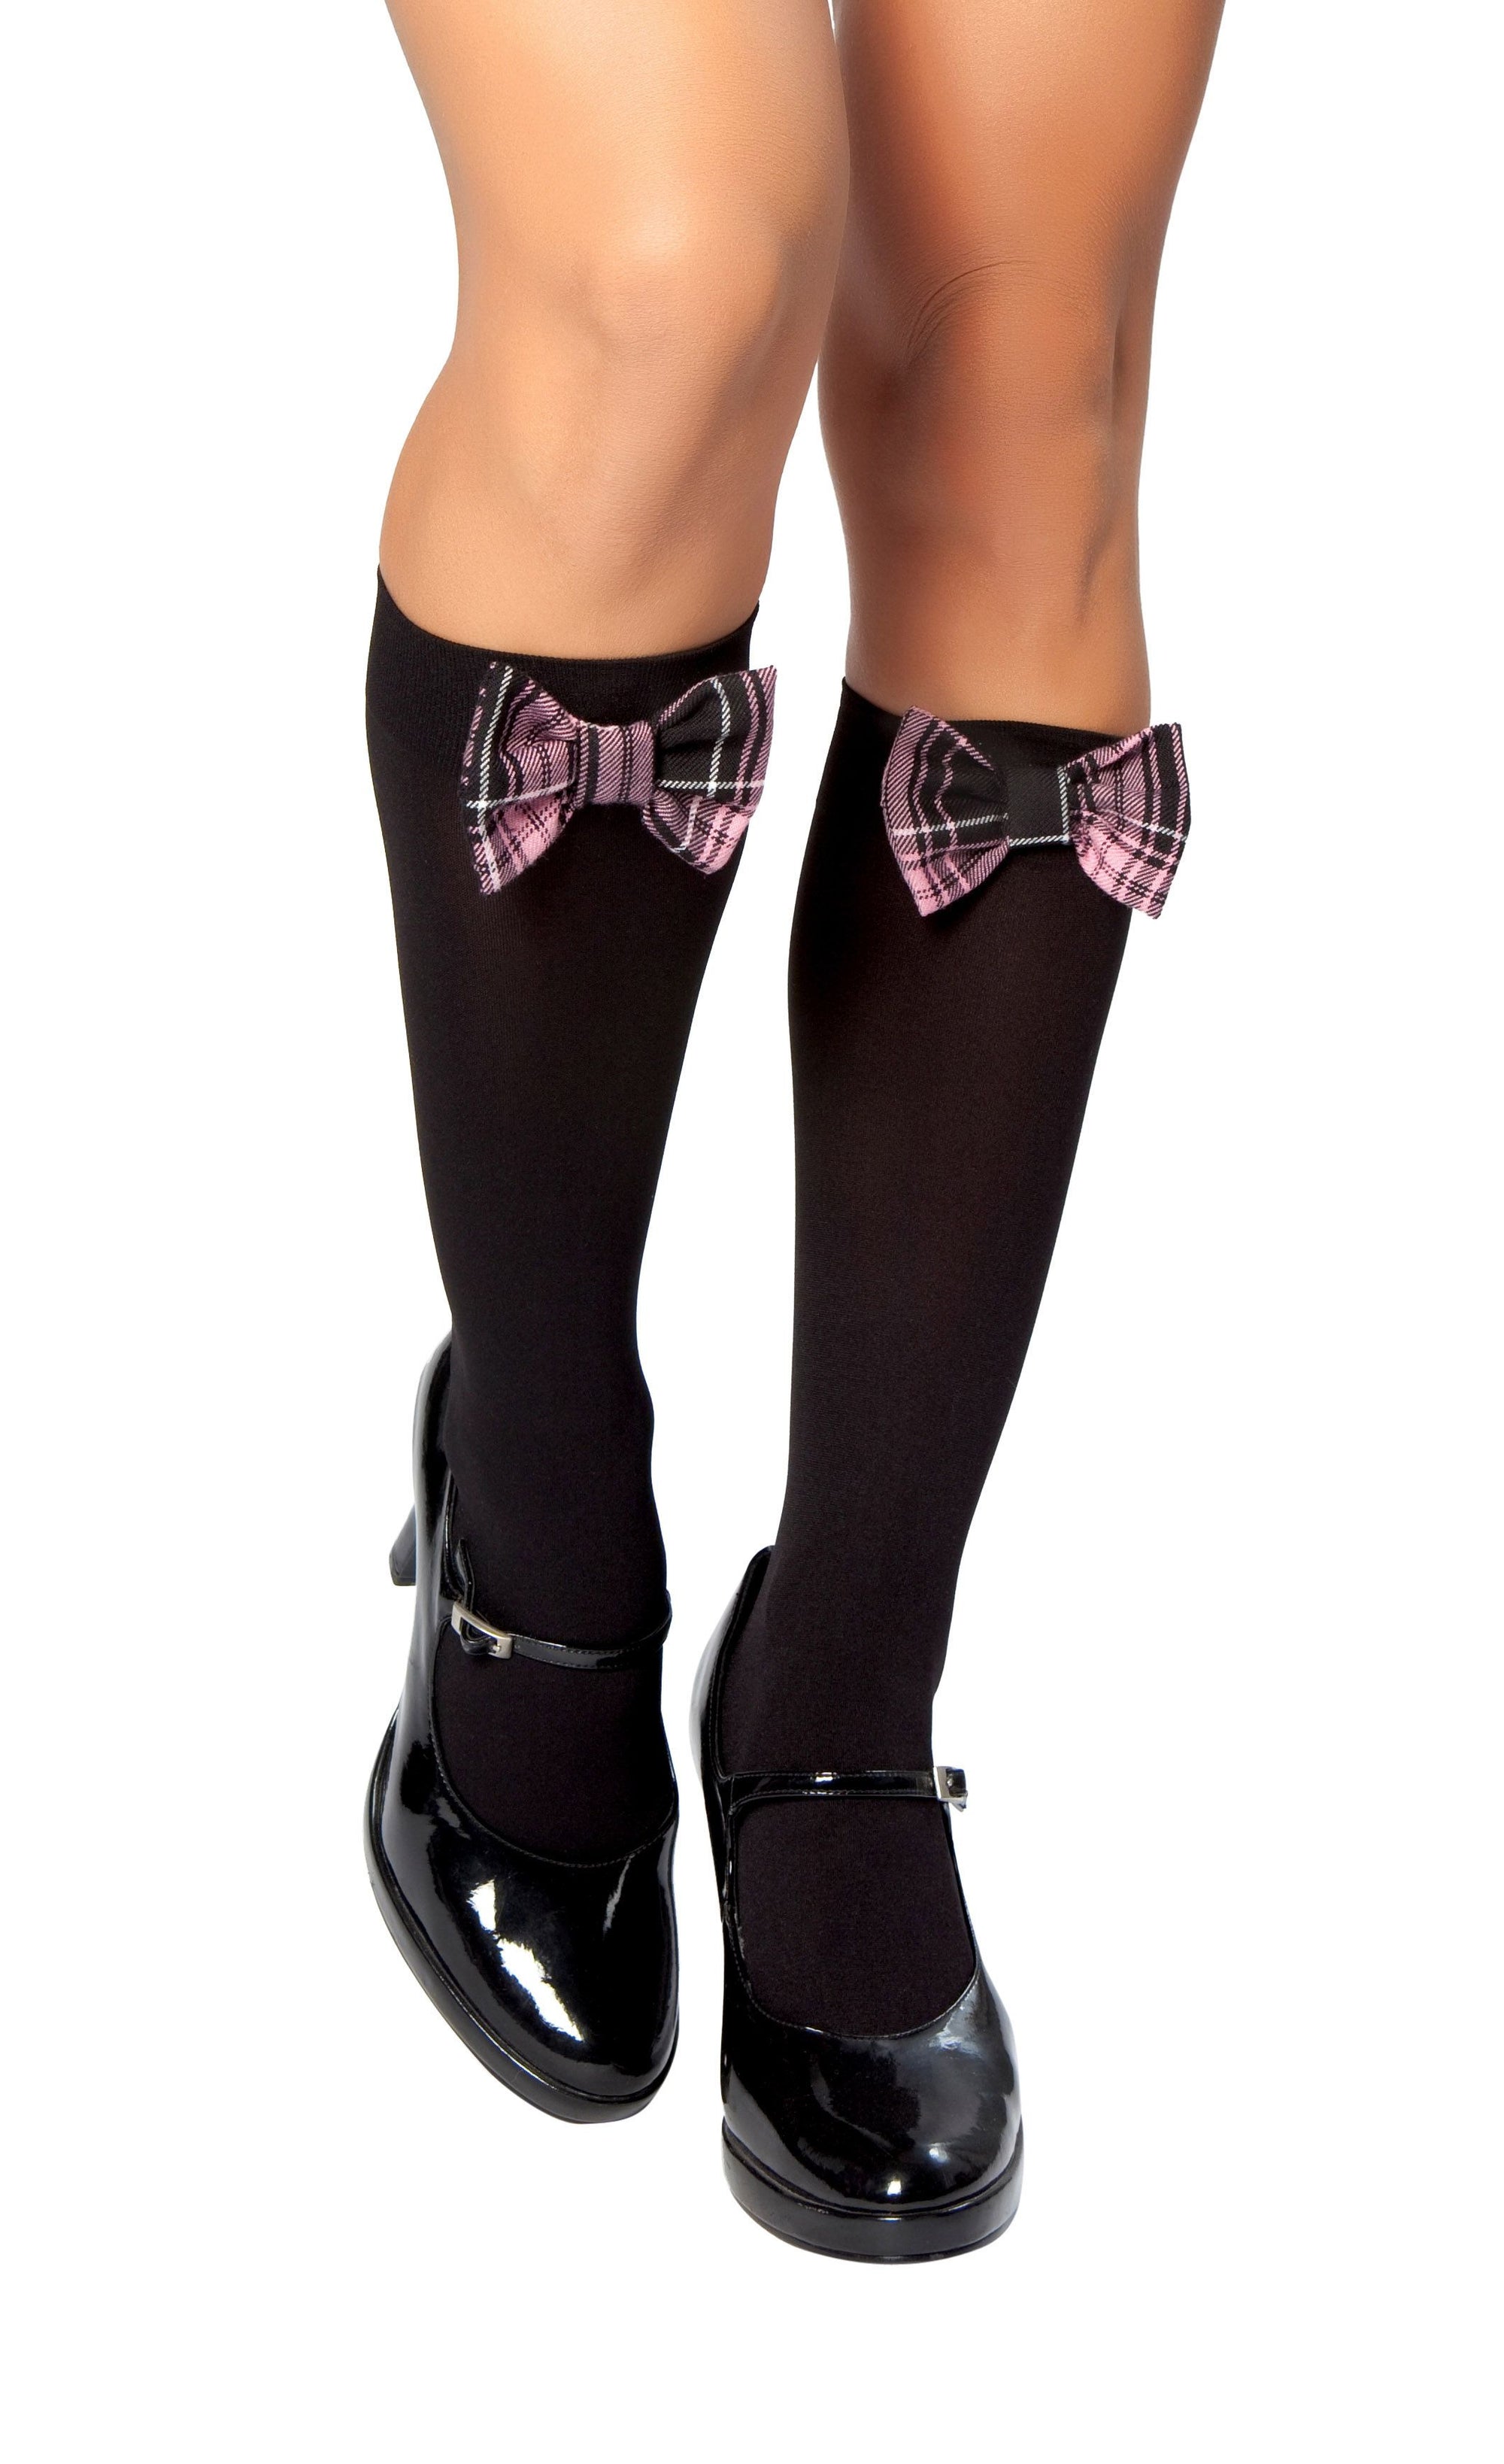 Roma Costume Knee High Stockings with Plaid Bows Black One Size